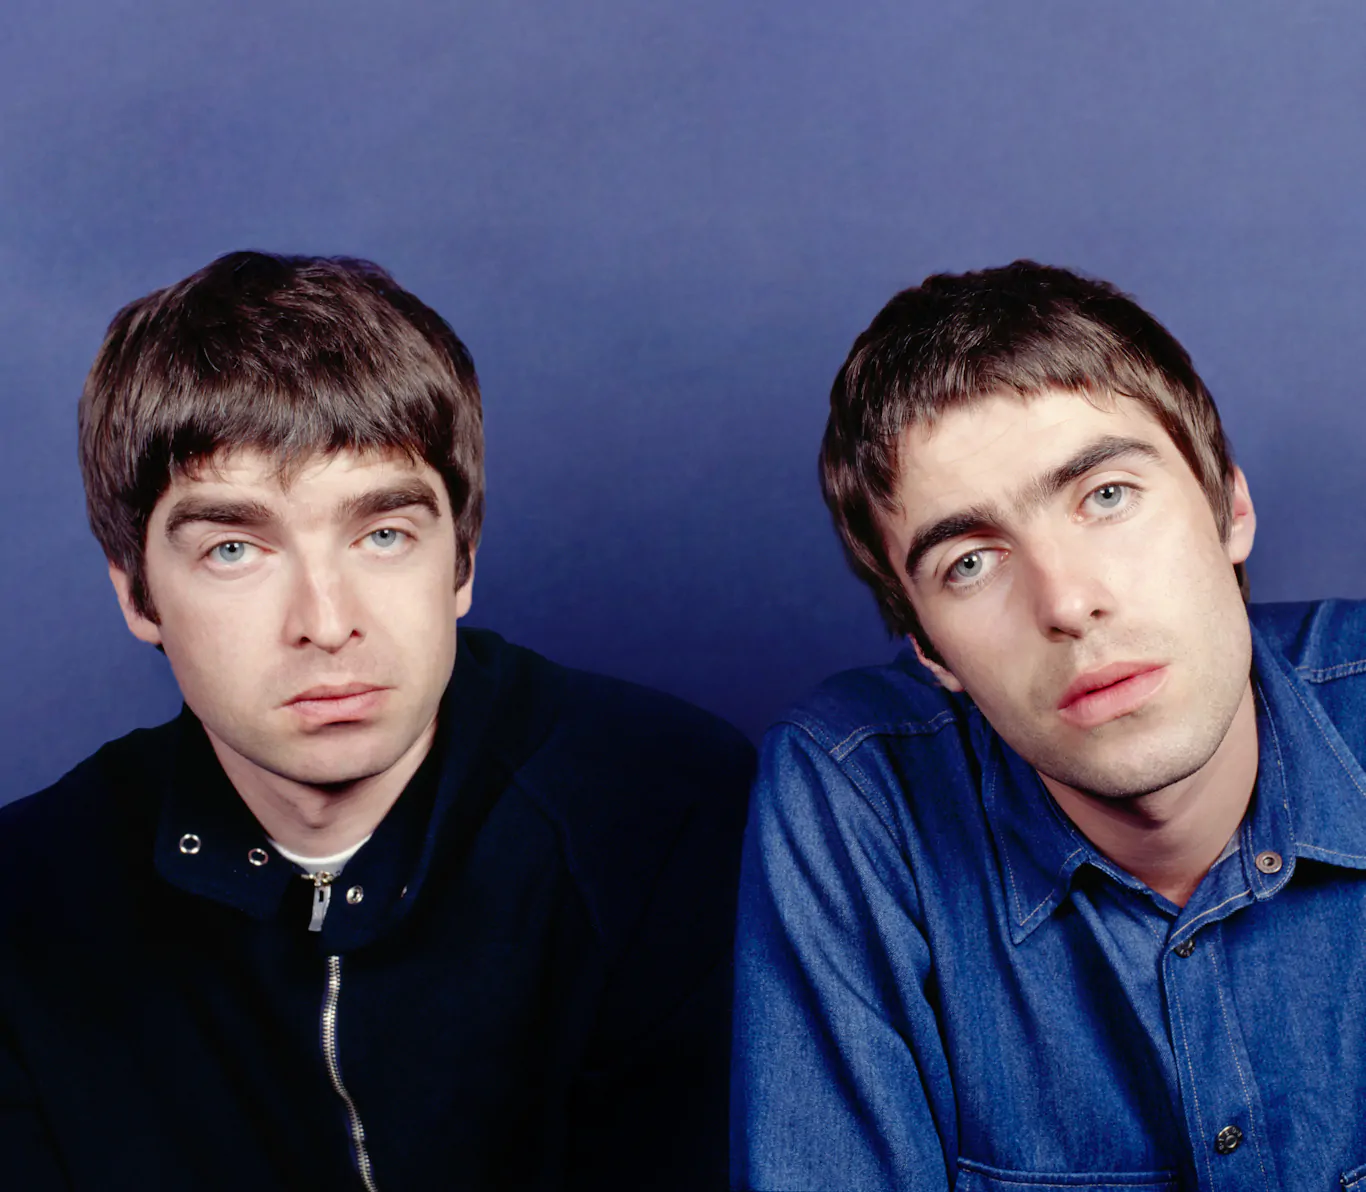 Big Brother Recordings Celebrate the 25th anniversary of OASIS’ iconic third album ‘Be Here Now’ on August 21st